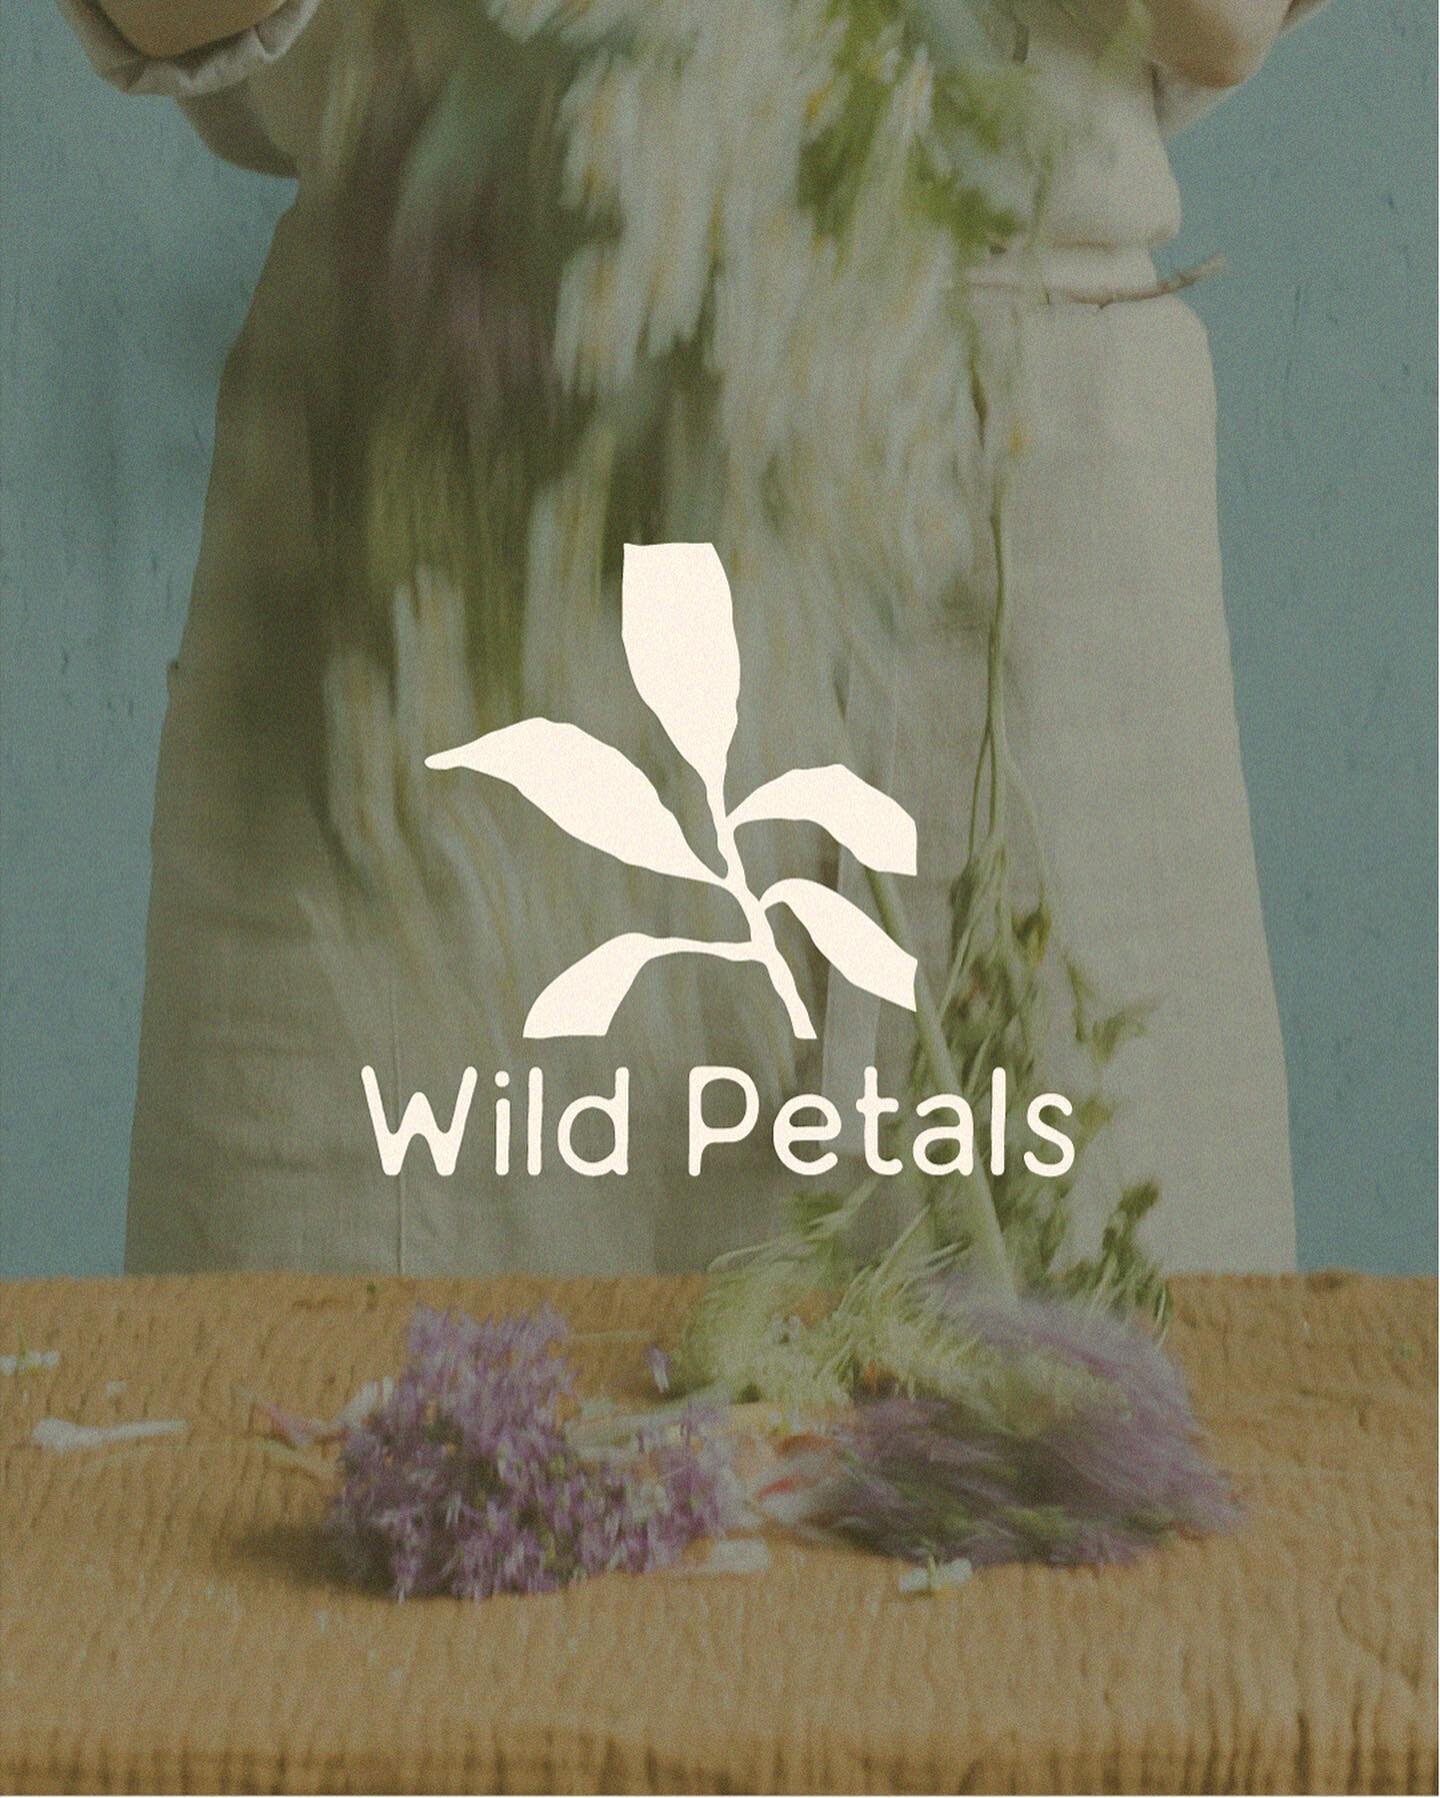 Sharing a brand design for Wild Petals. This brand identity features a hand drawn logo and earthy color palette. 

Would you like a brand like this one? Get in touch and let&rsquo;s chat about how a So Swell Studio brand package can get your business